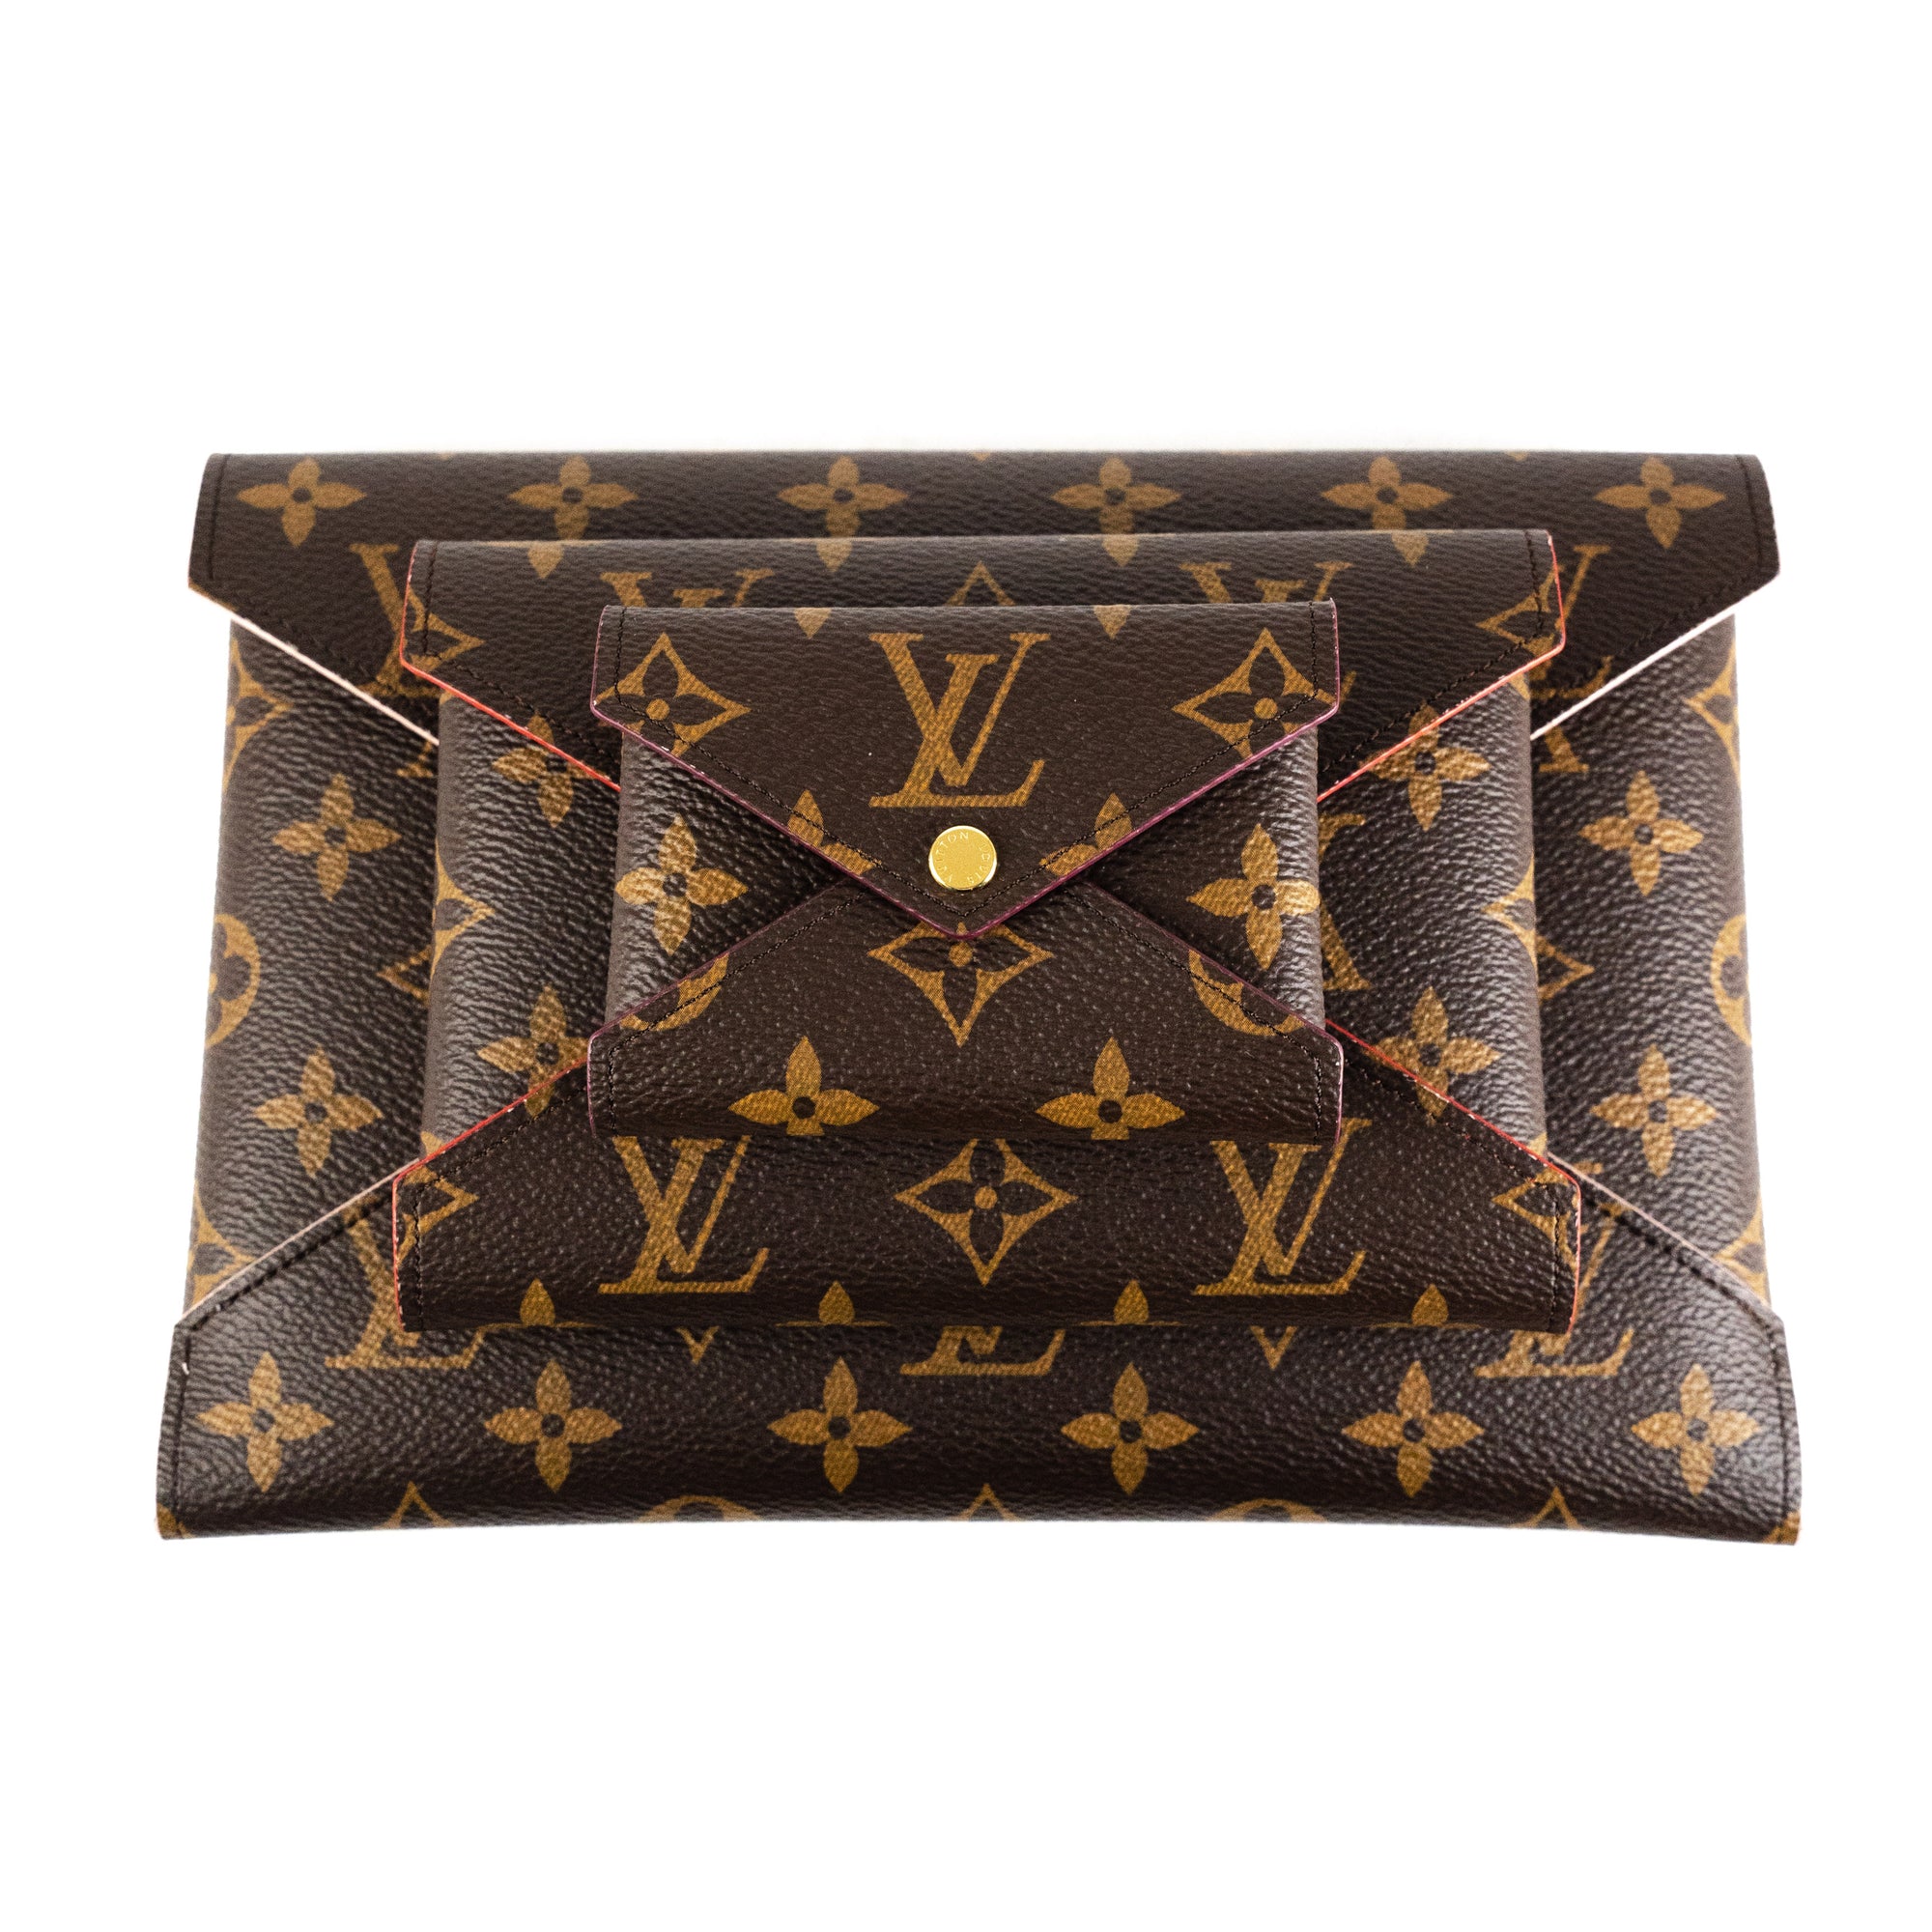 Louis Vuitton Large Kirigami Pouch Sunrise Pastel – Addicted to